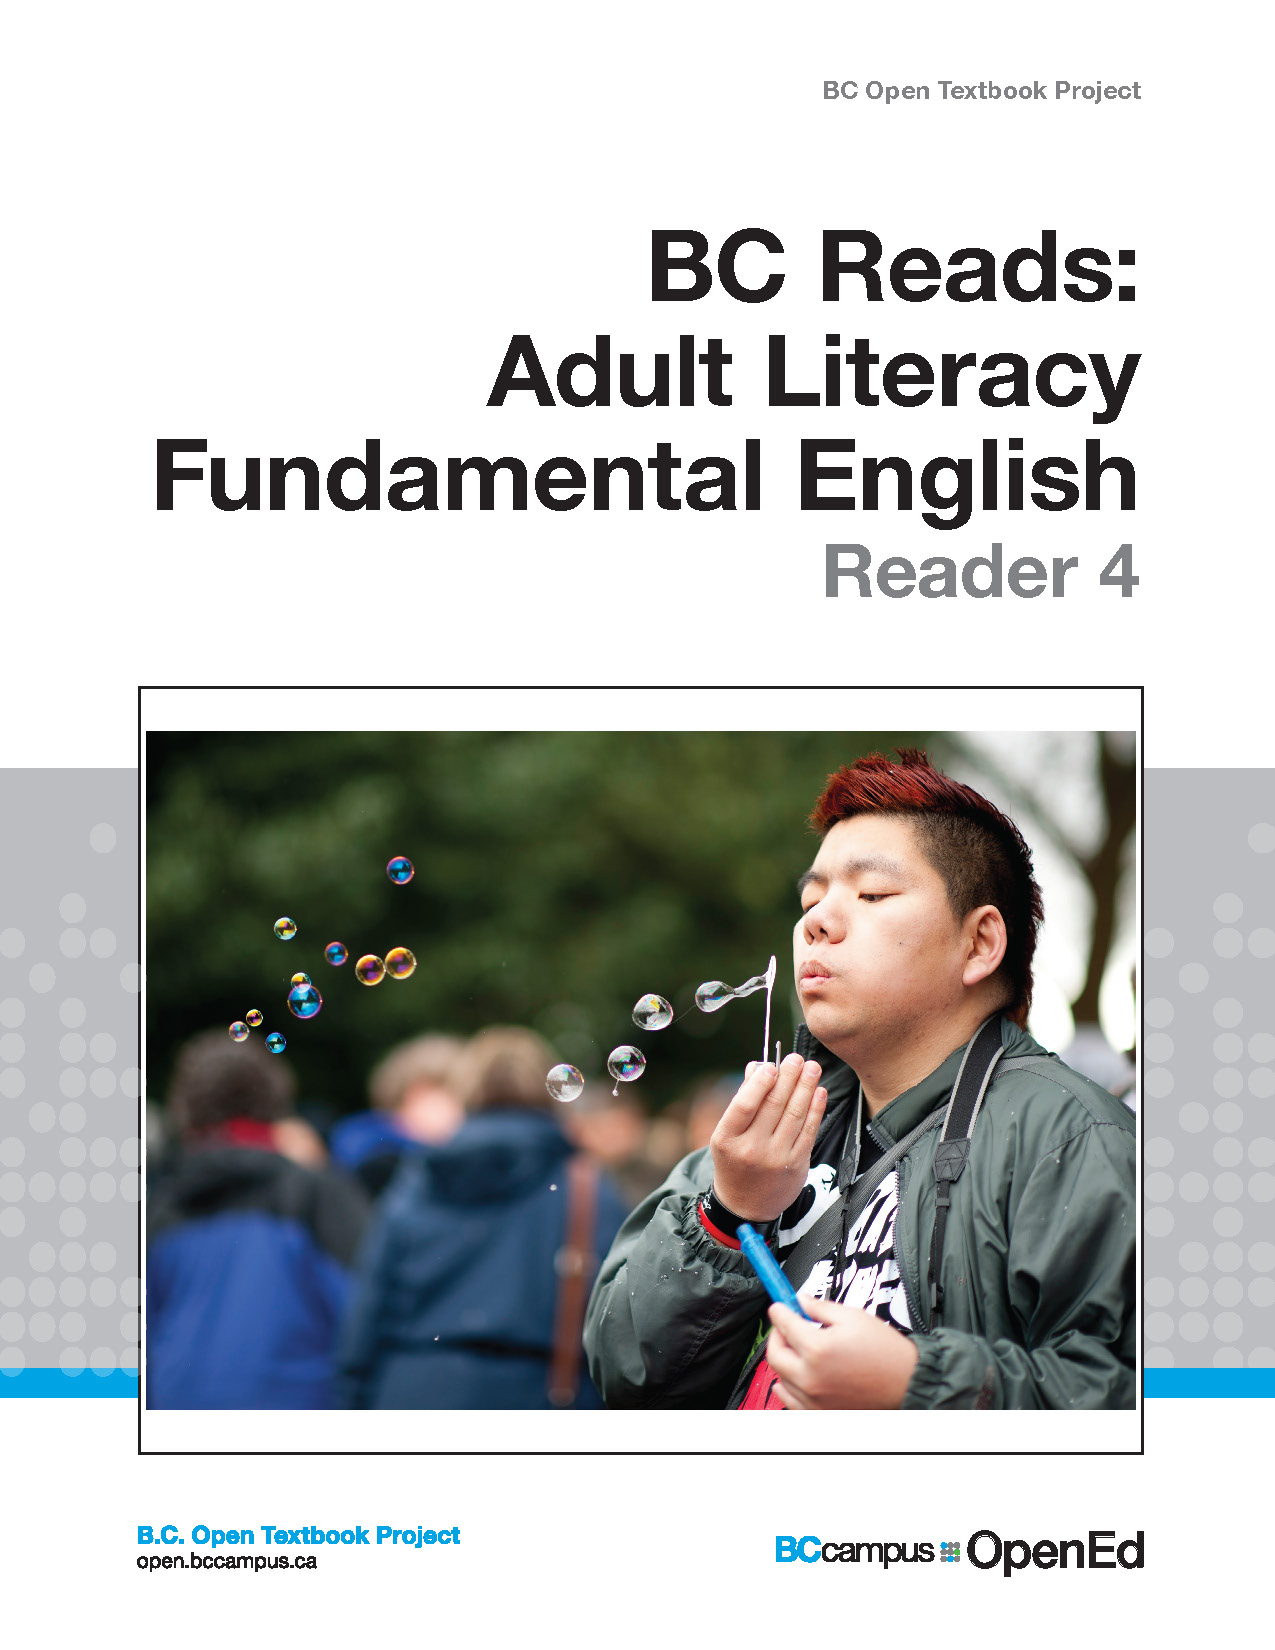 Cover image for Adult Literacy Fundamental English - Reader 4